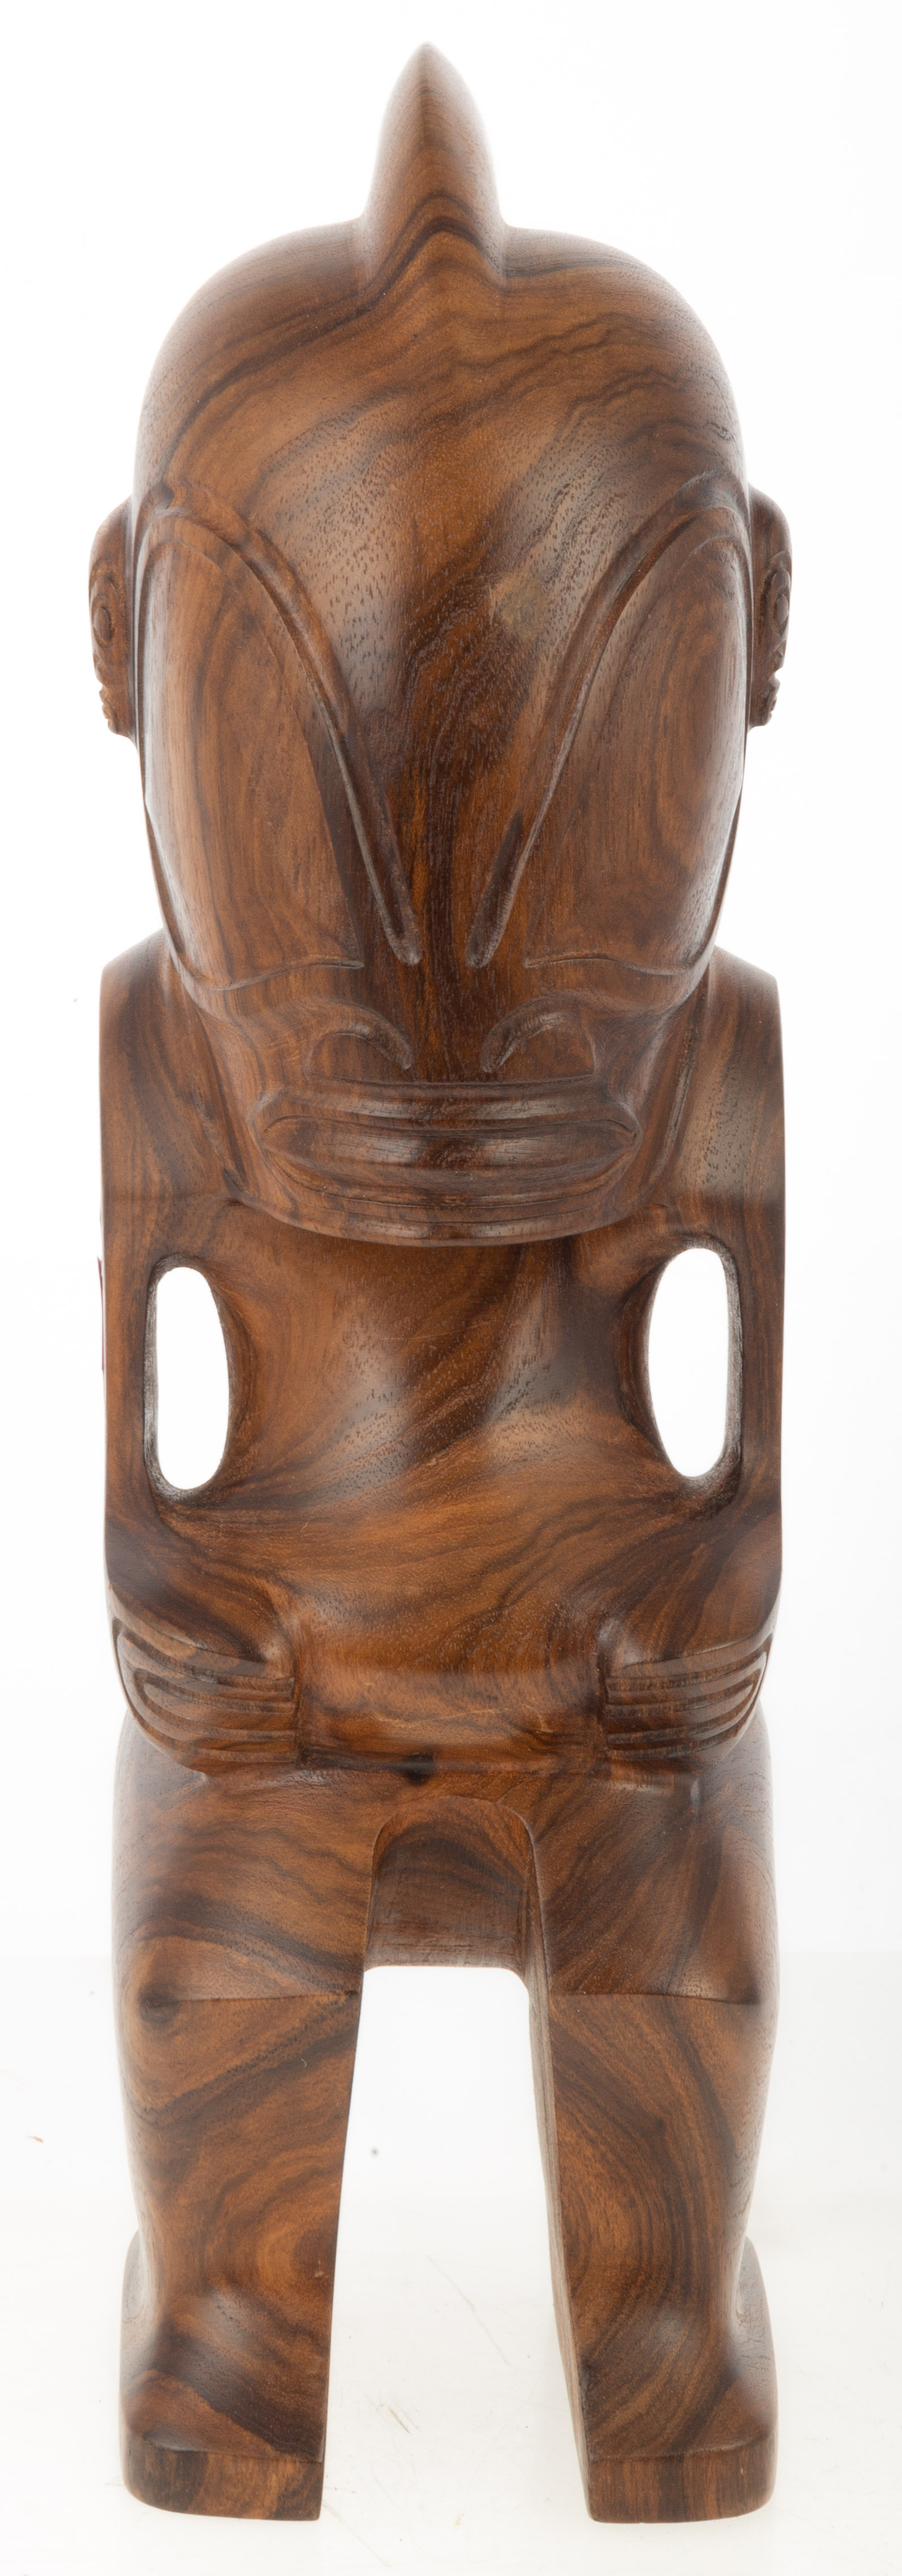 SMALL CARVED AFRICAN FIGURE 16 2e959e